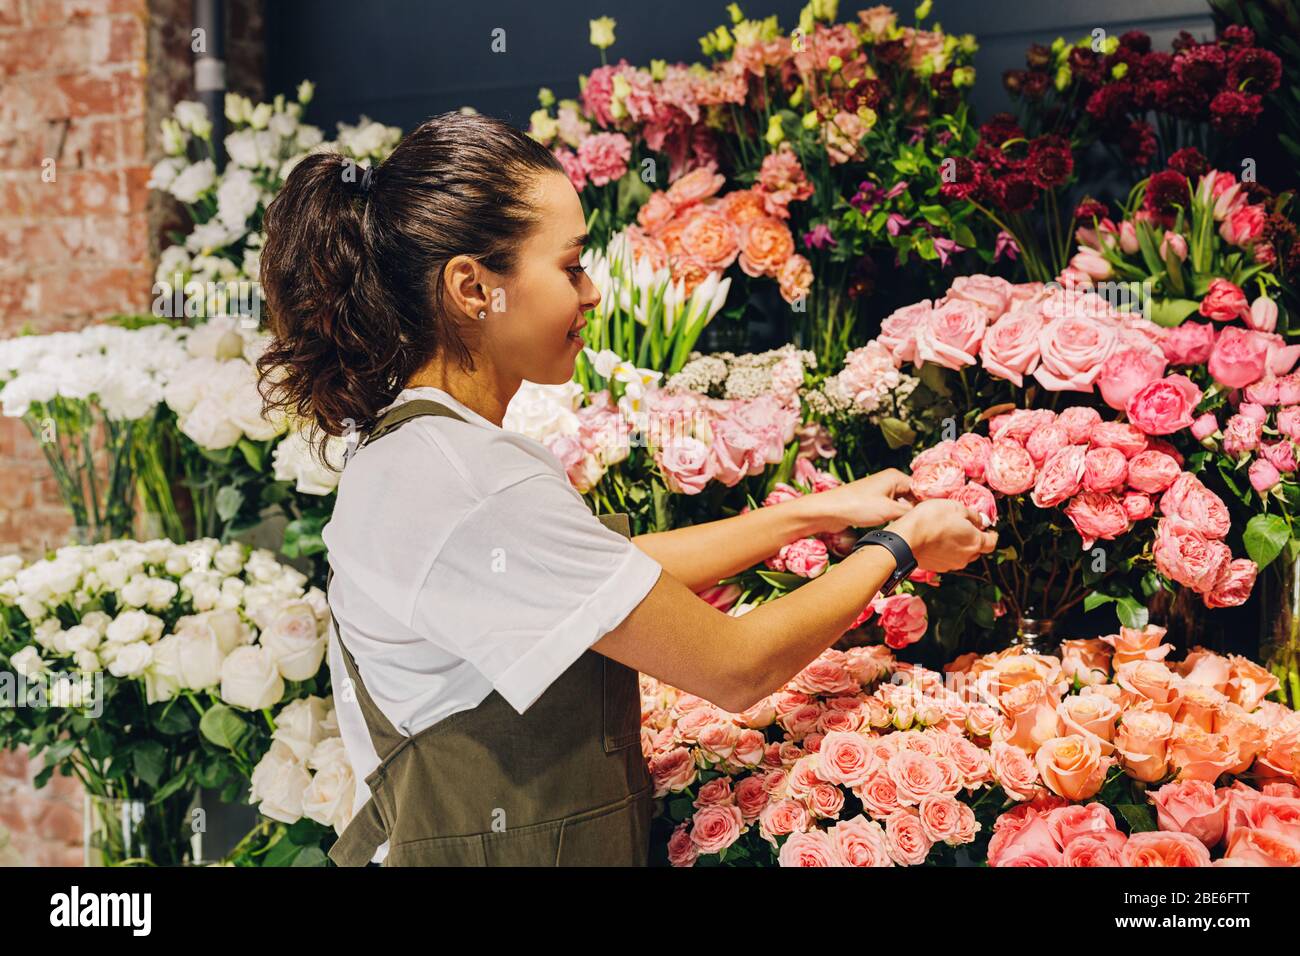 Young woman caring for flowers in a flower shop Stock Photo